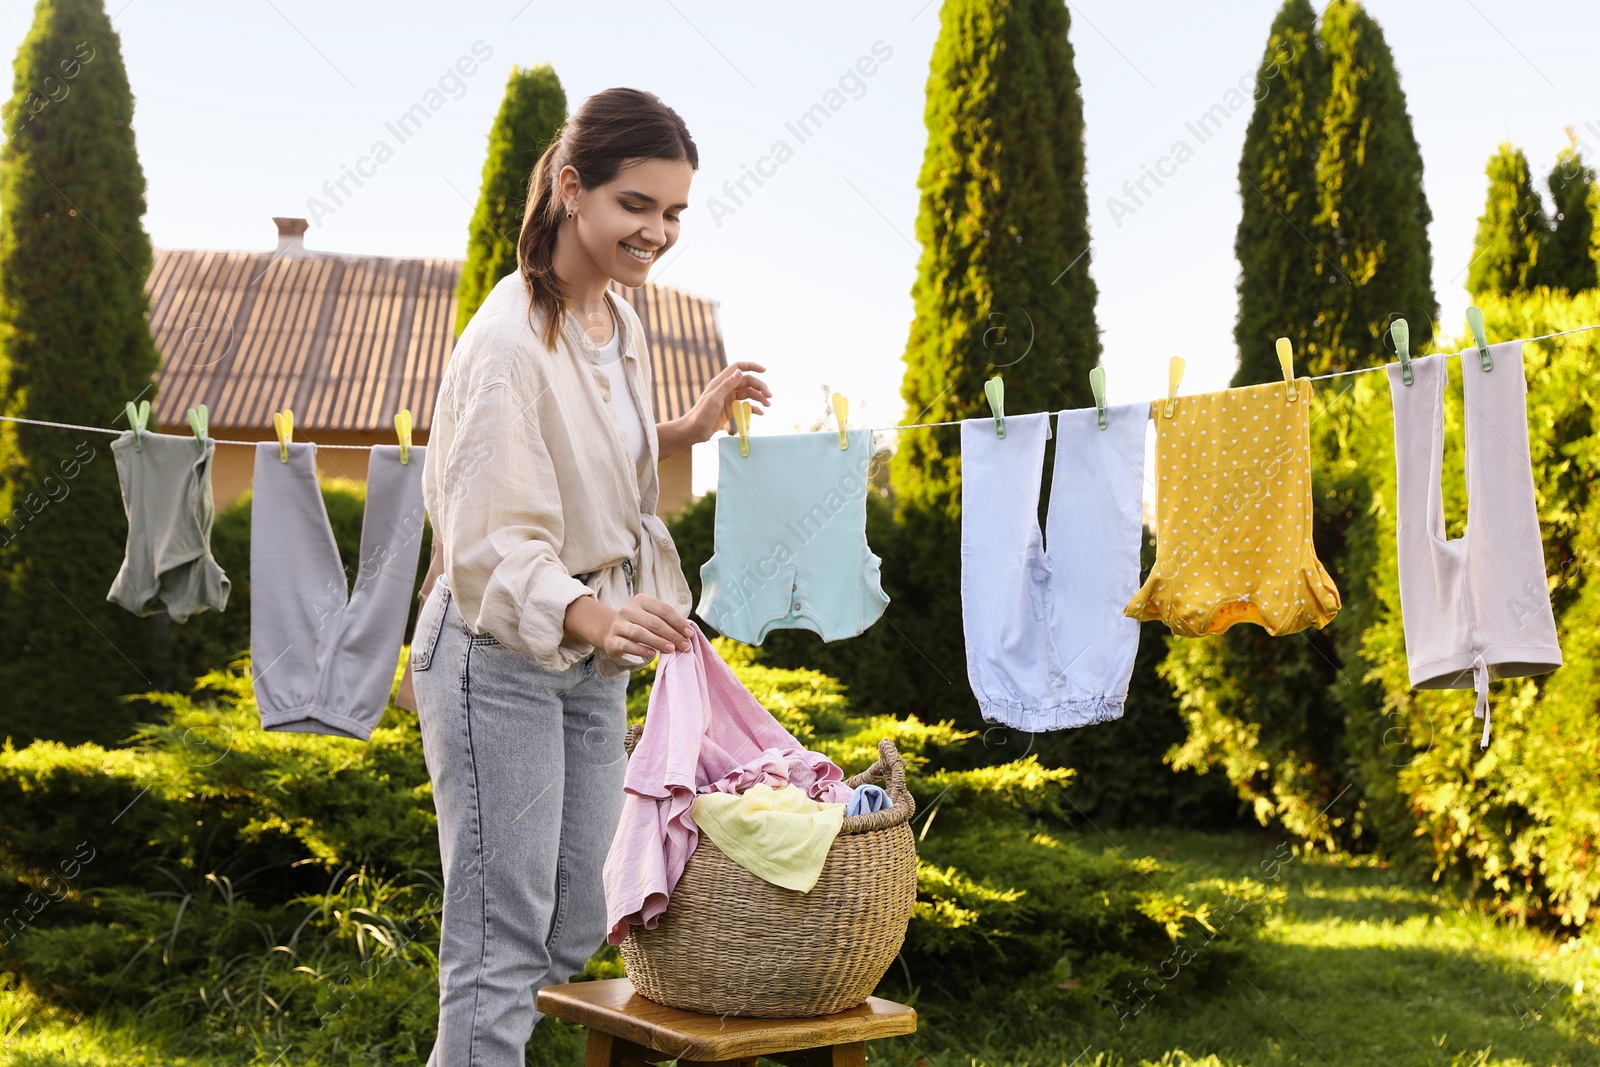 Photo of Smiling woman hanging baby clothes with clothespins on washing line for drying in backyard